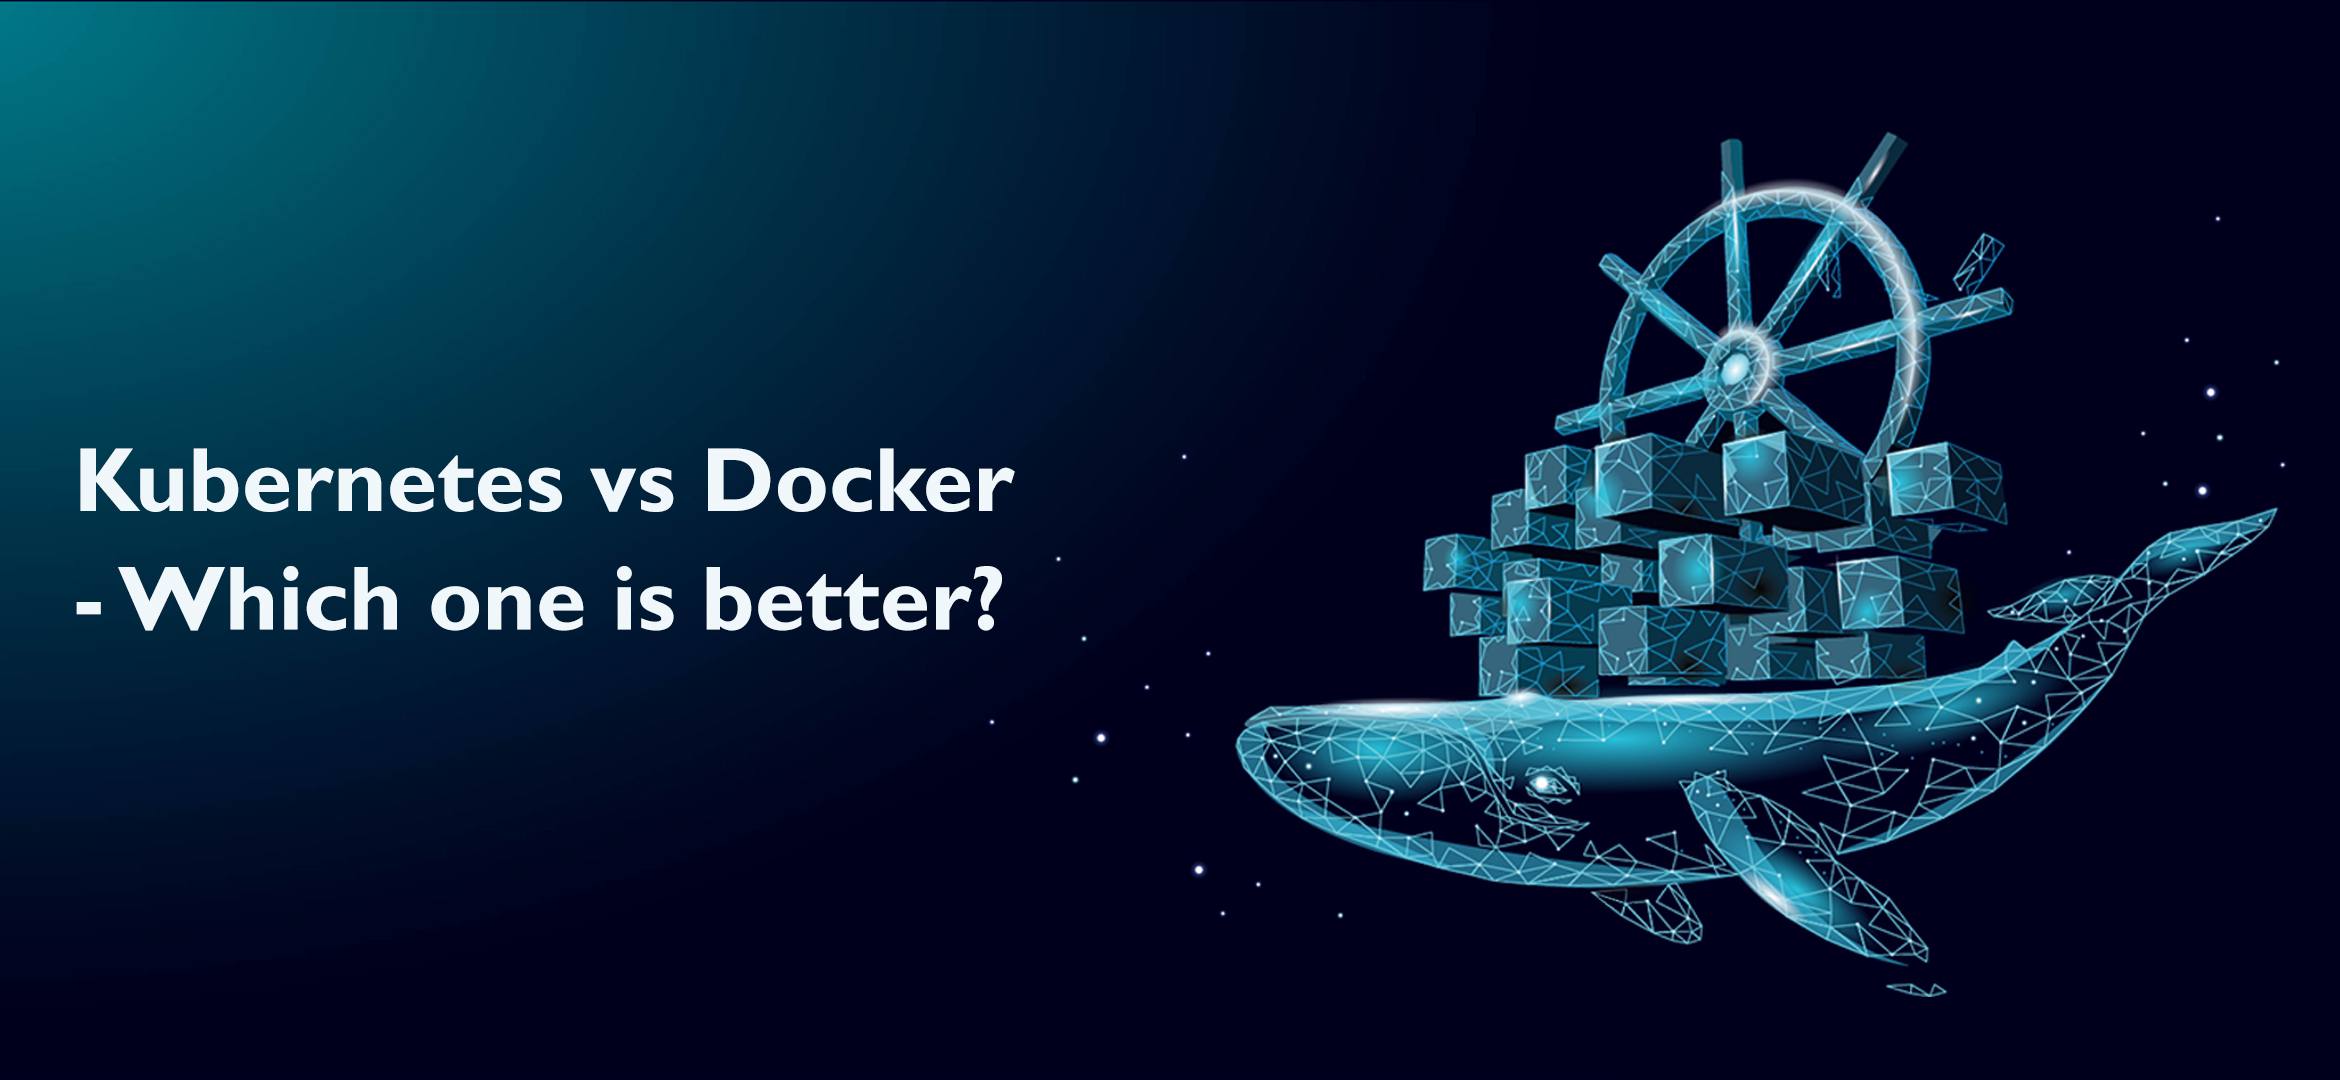 Docker vs. Kubernetes - Which one is better?